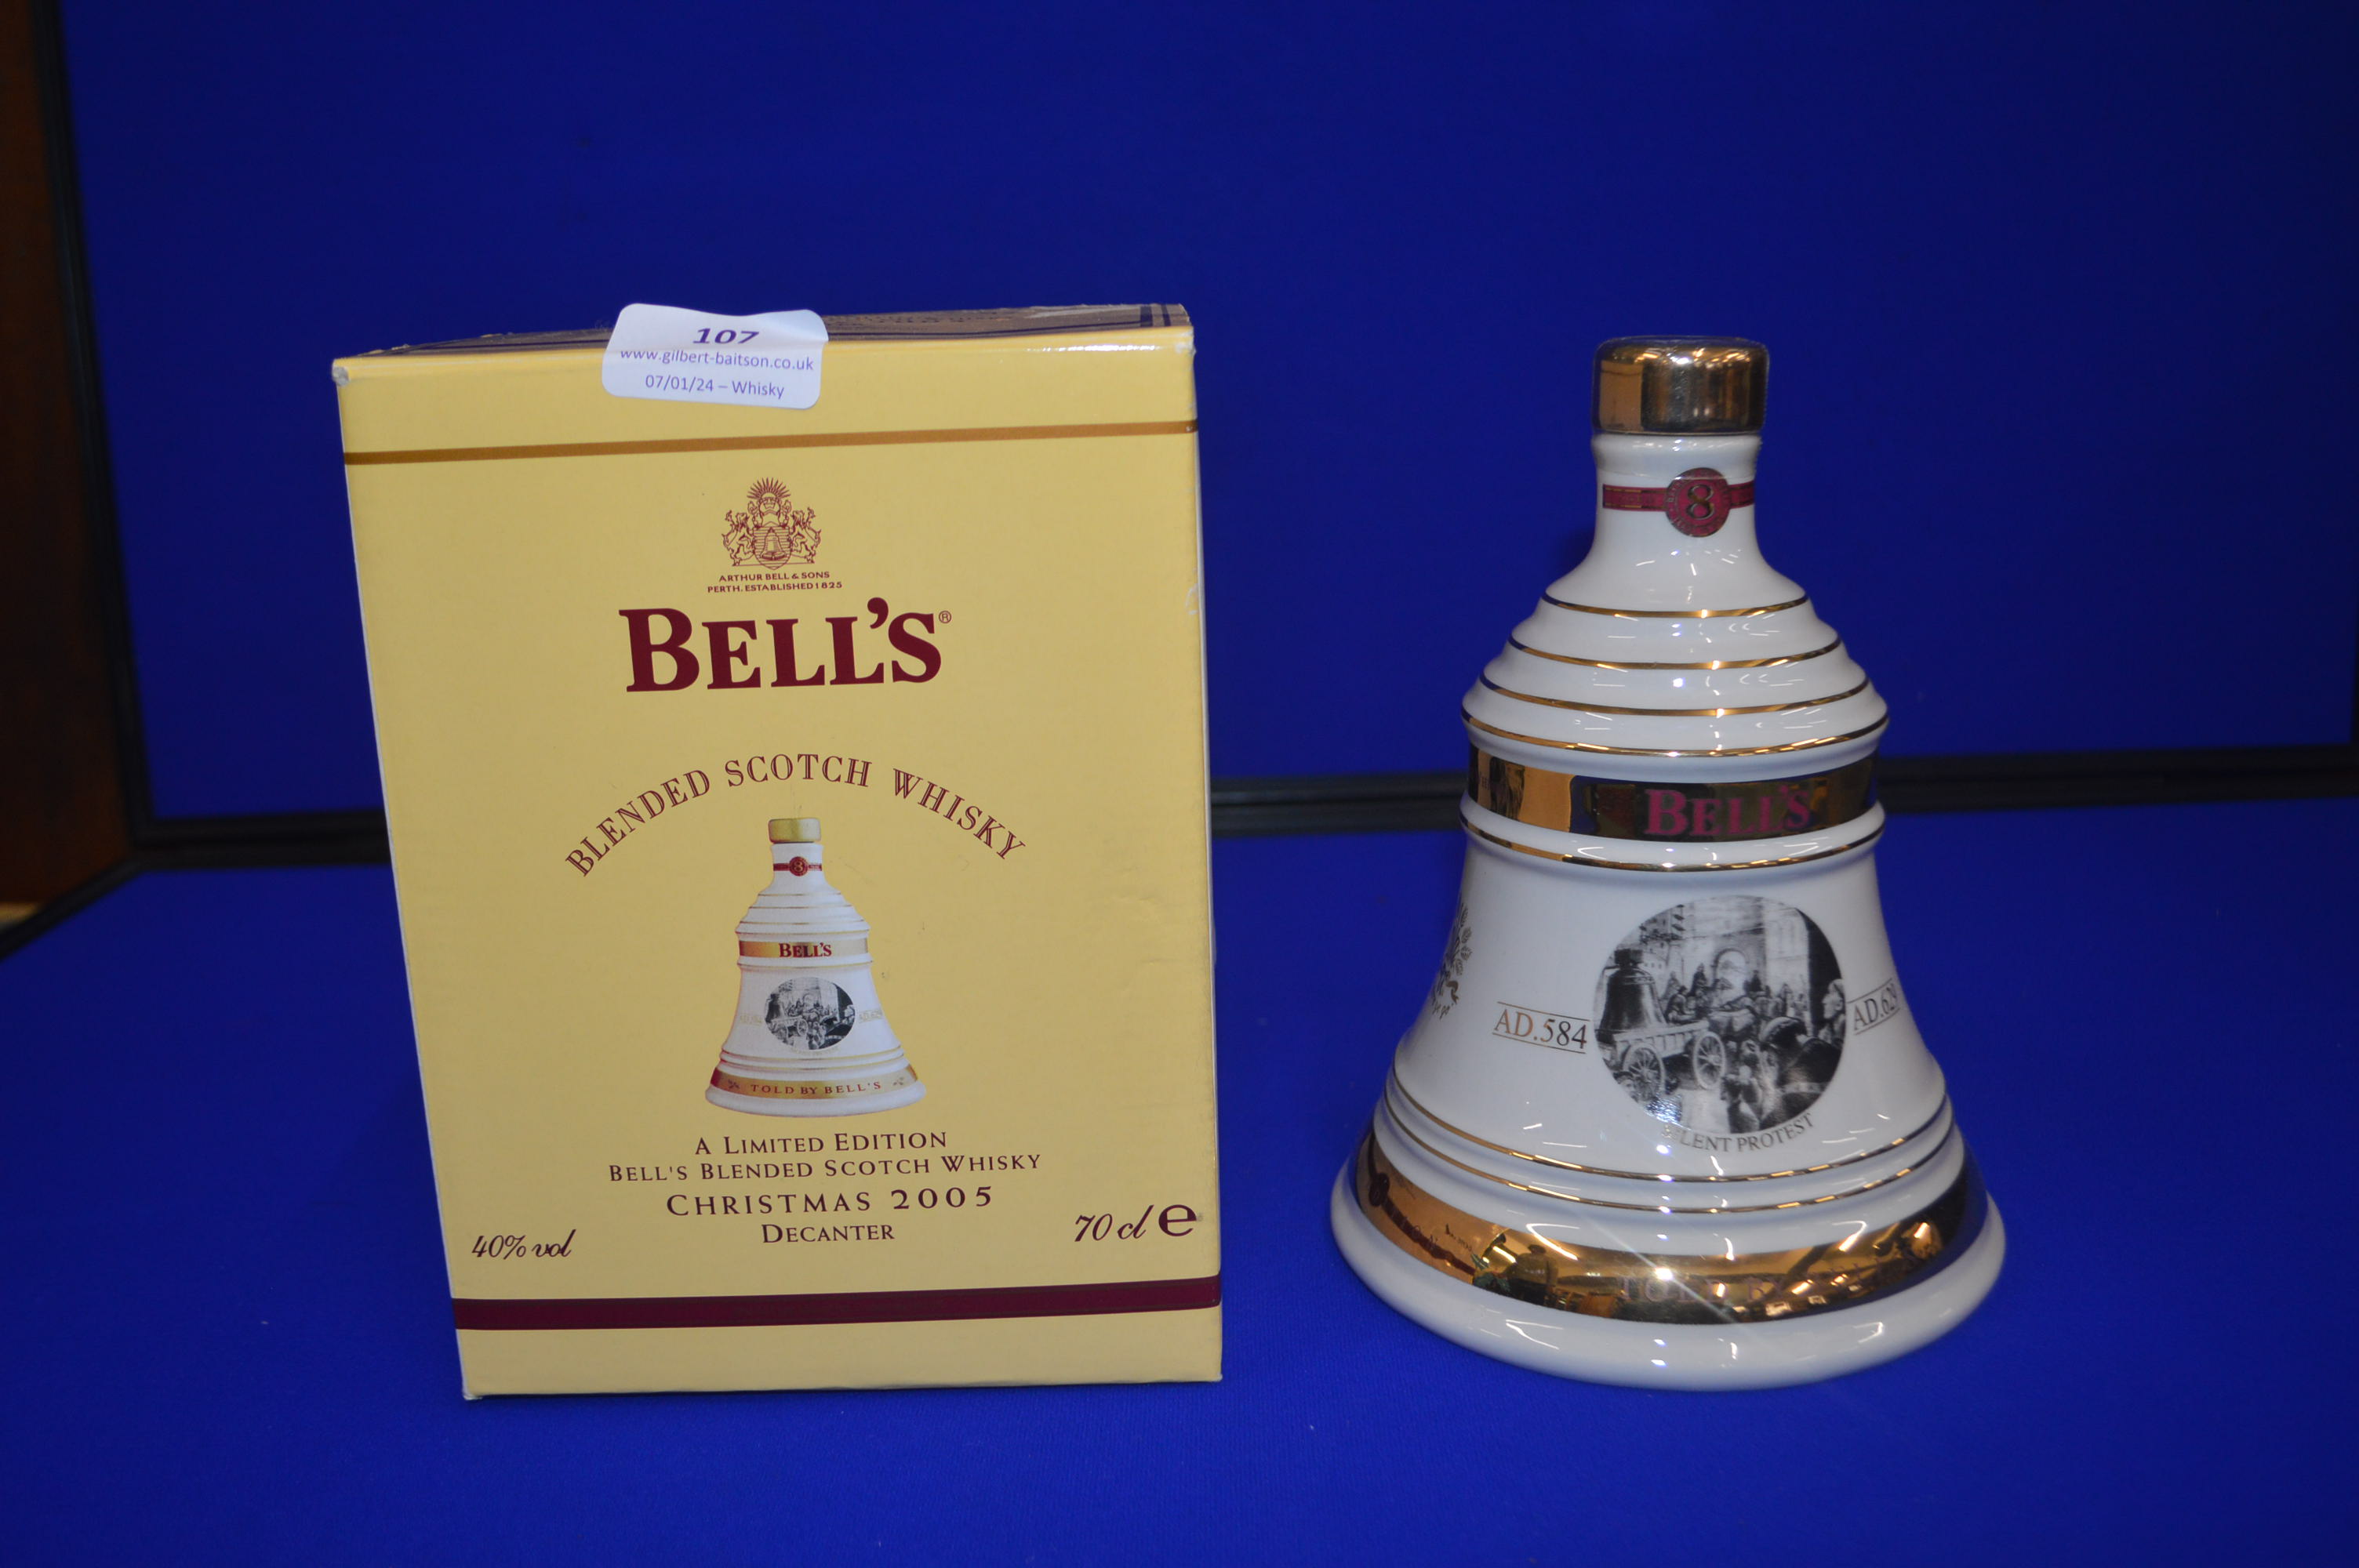 Bell’s Christmas 2005 Decanter